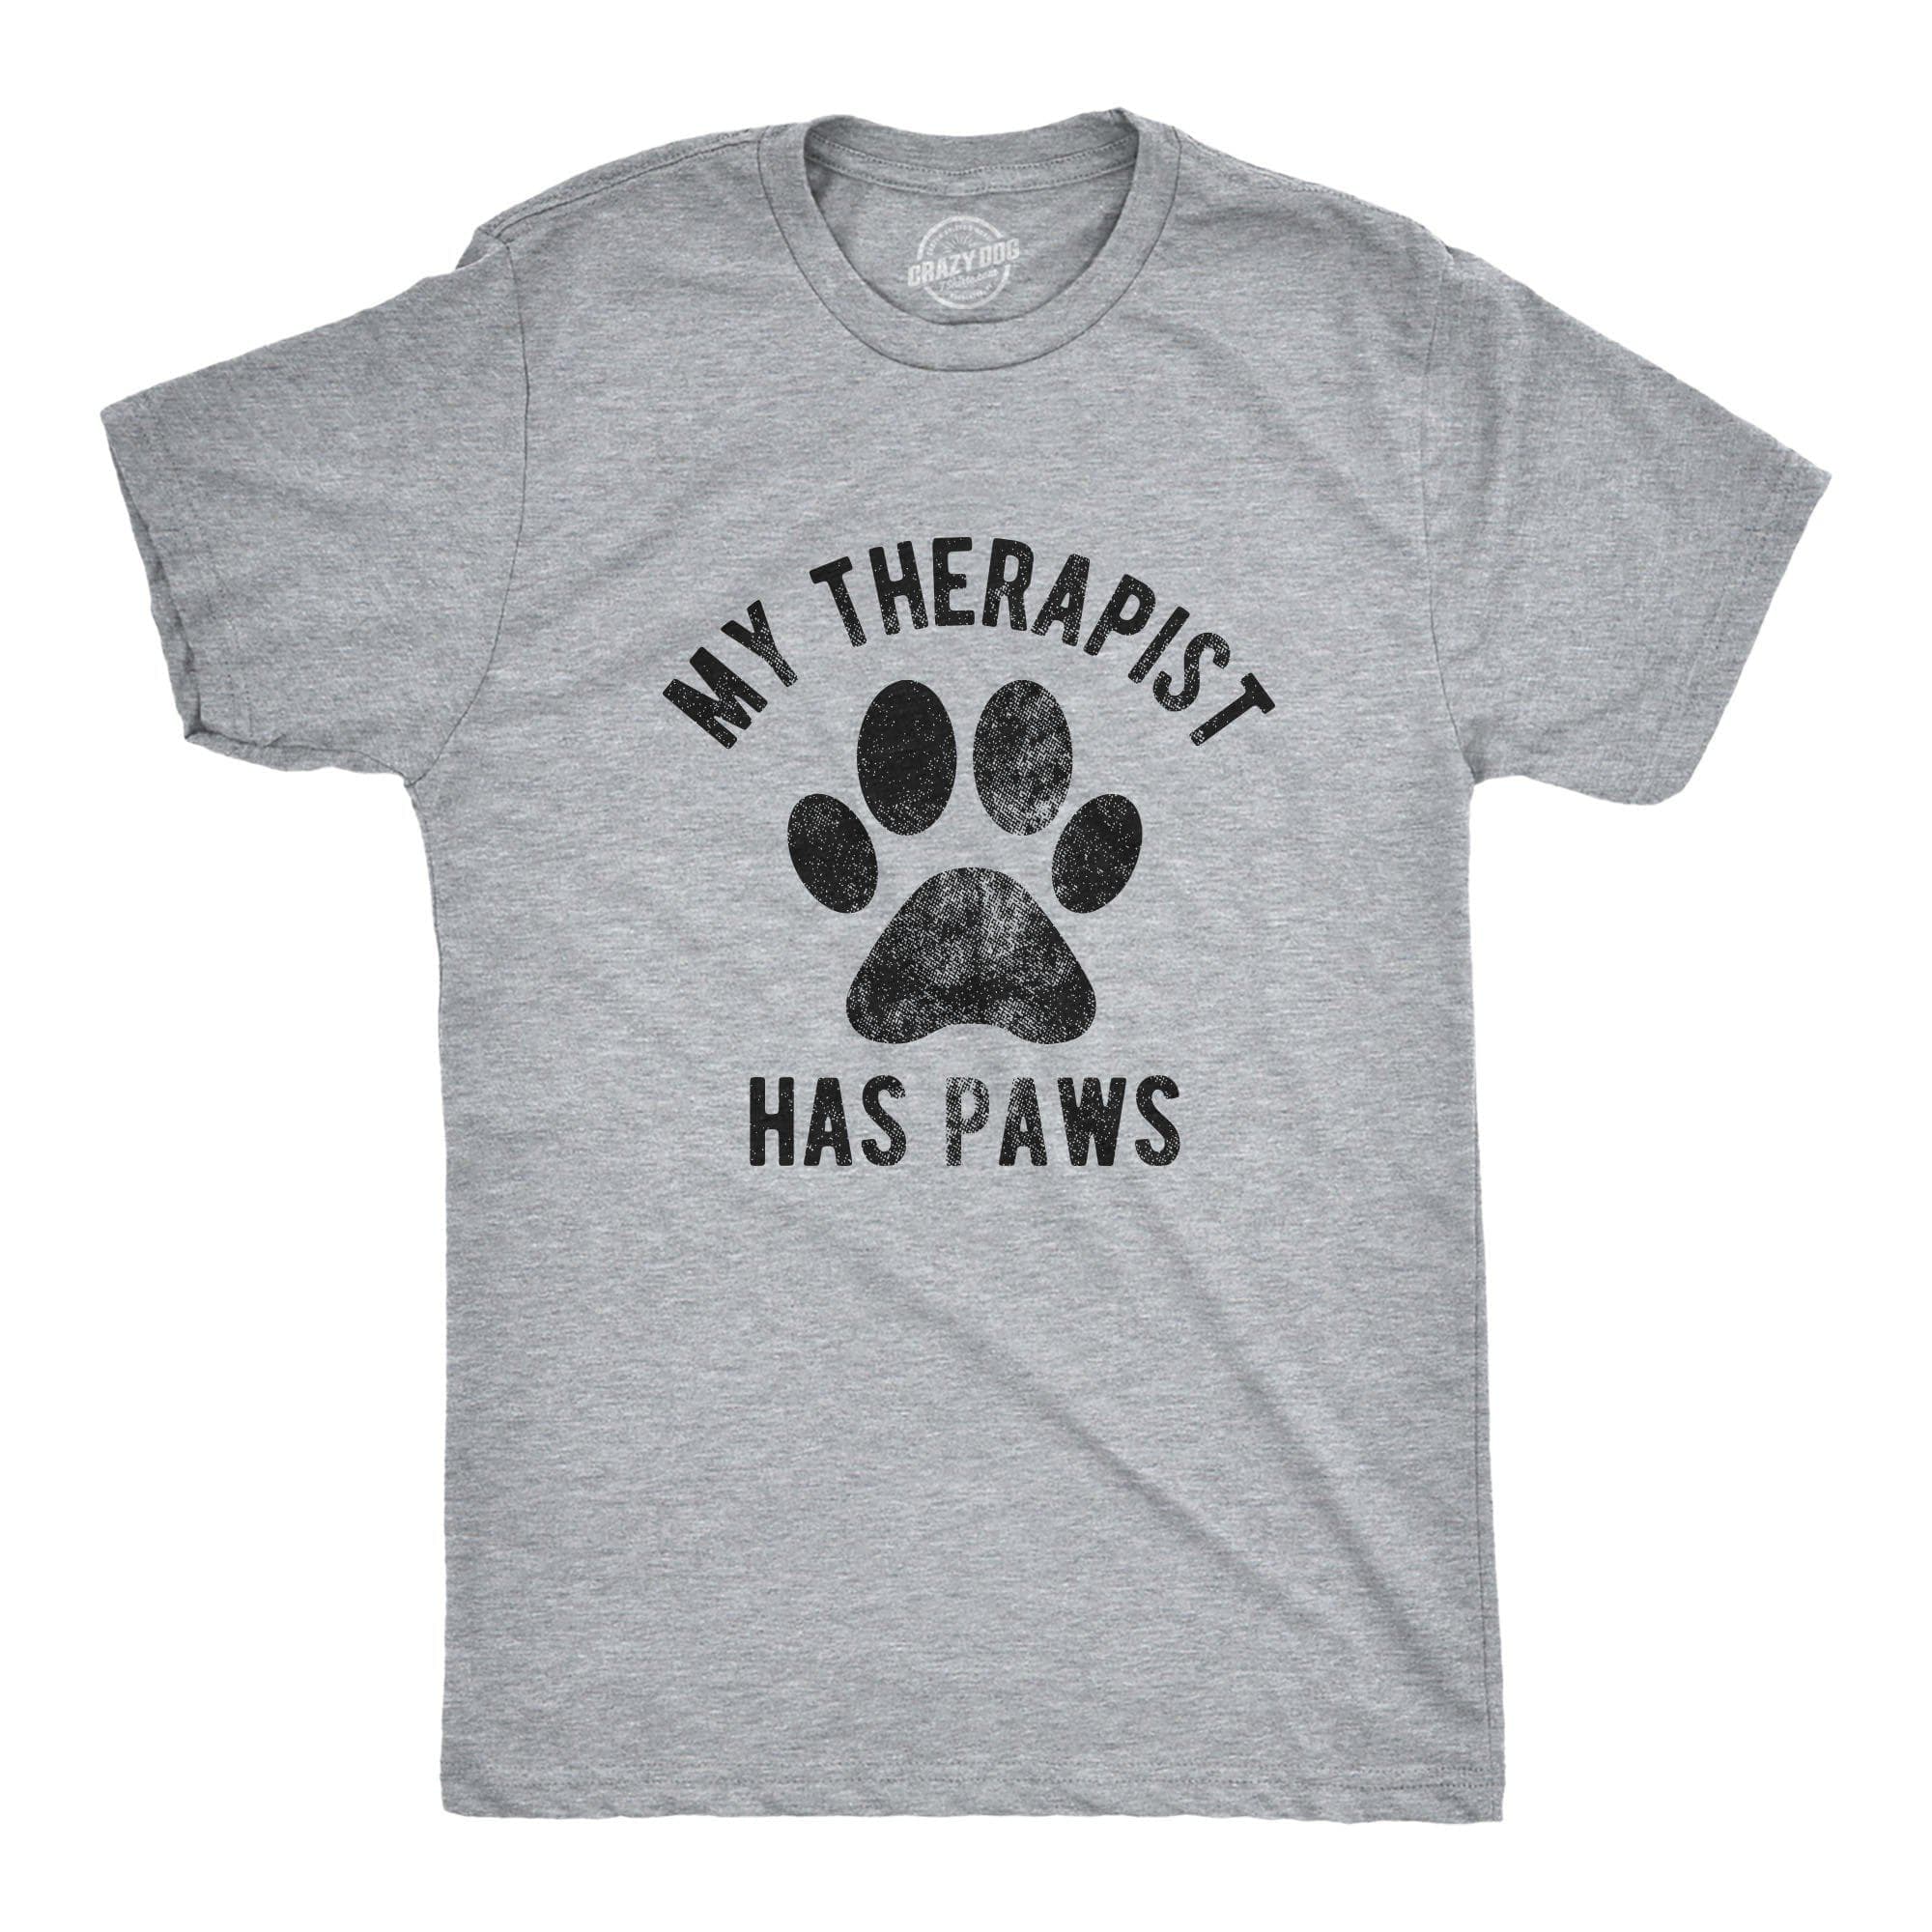 My Therapist Has Paws Men's Tshirt - Crazy Dog T-Shirts